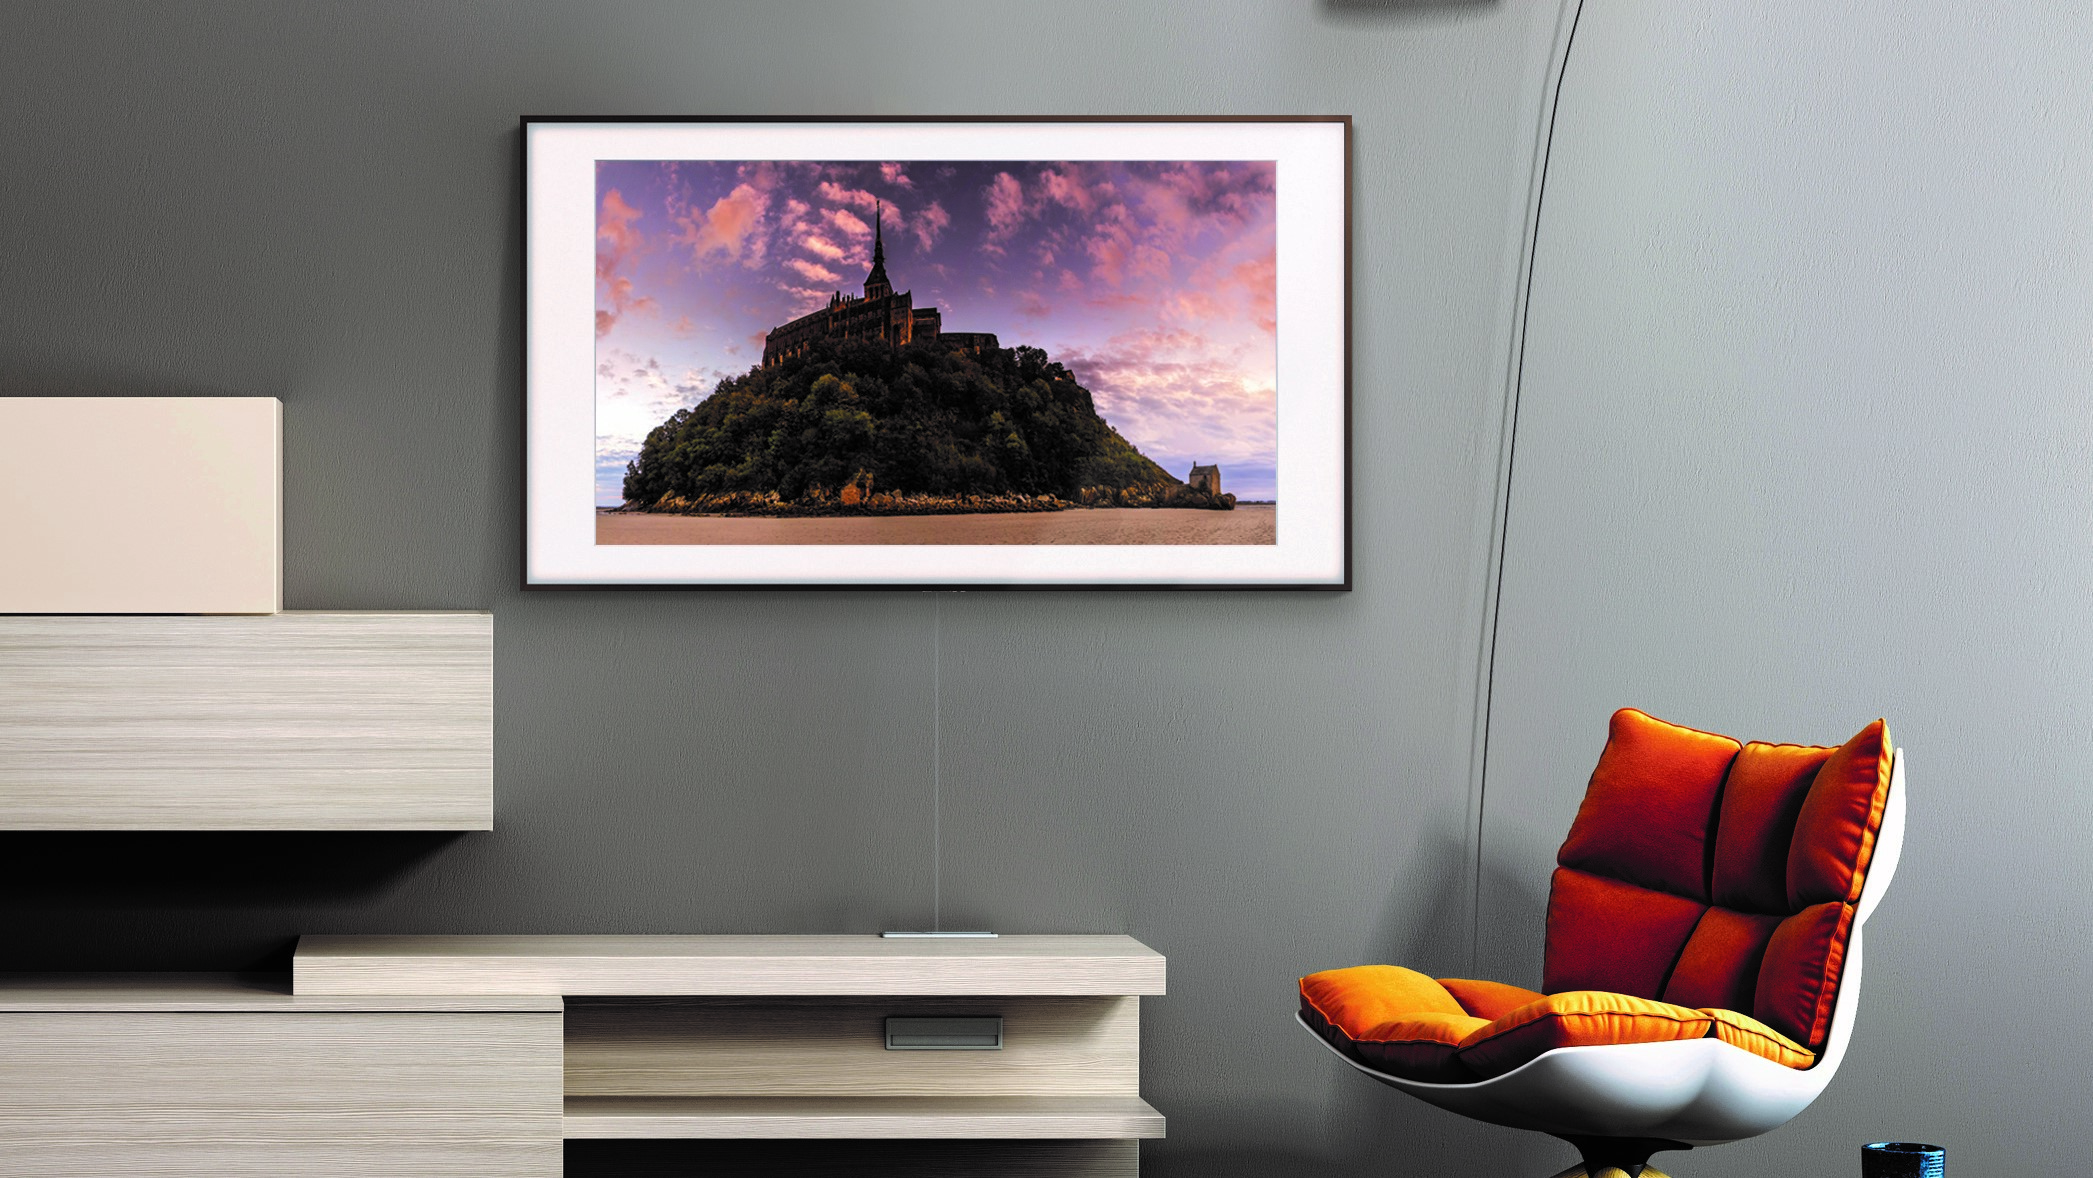 Samsung The Frame smart TV hanging on wall while displaying painting, near orange chair